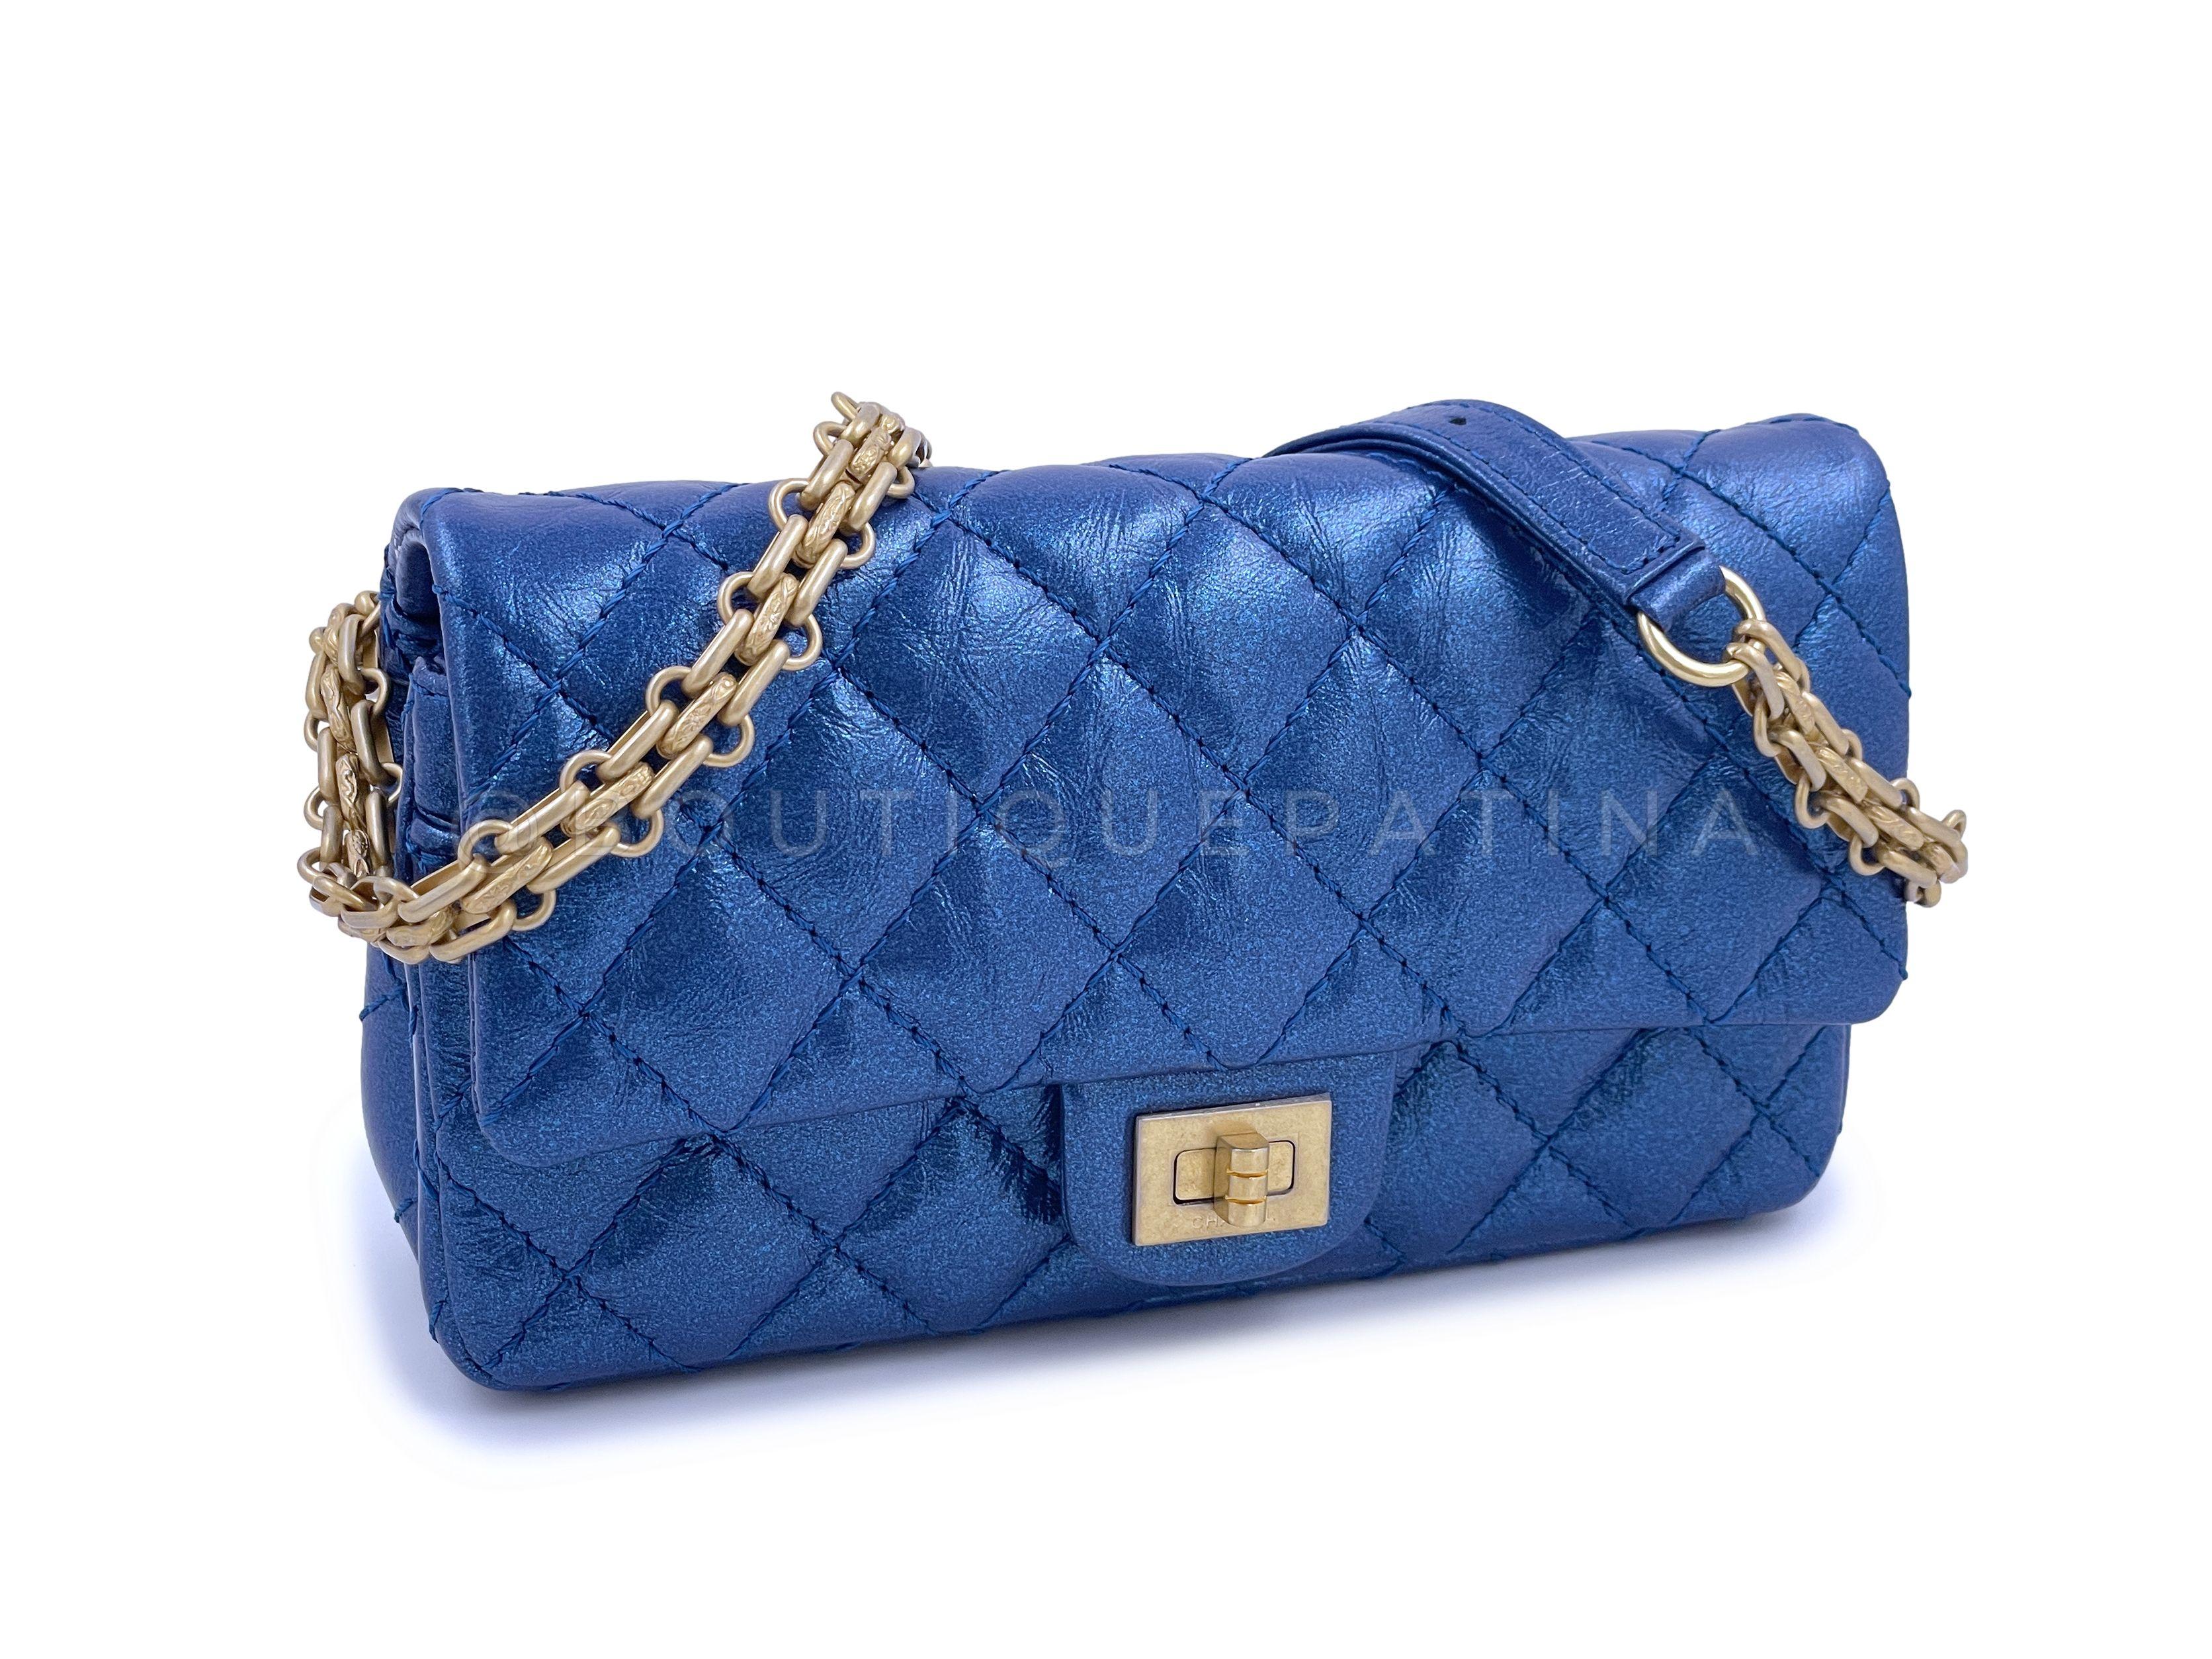 Store SKU: 64610
A whimsical fanny pack that is small enough to accessorize but will still fit a phone. 

In iridescent blue aged calfskin and brushed gold hardware. Unique to the 2019 Egypt Paris-New York collection, the hardware on the bags from